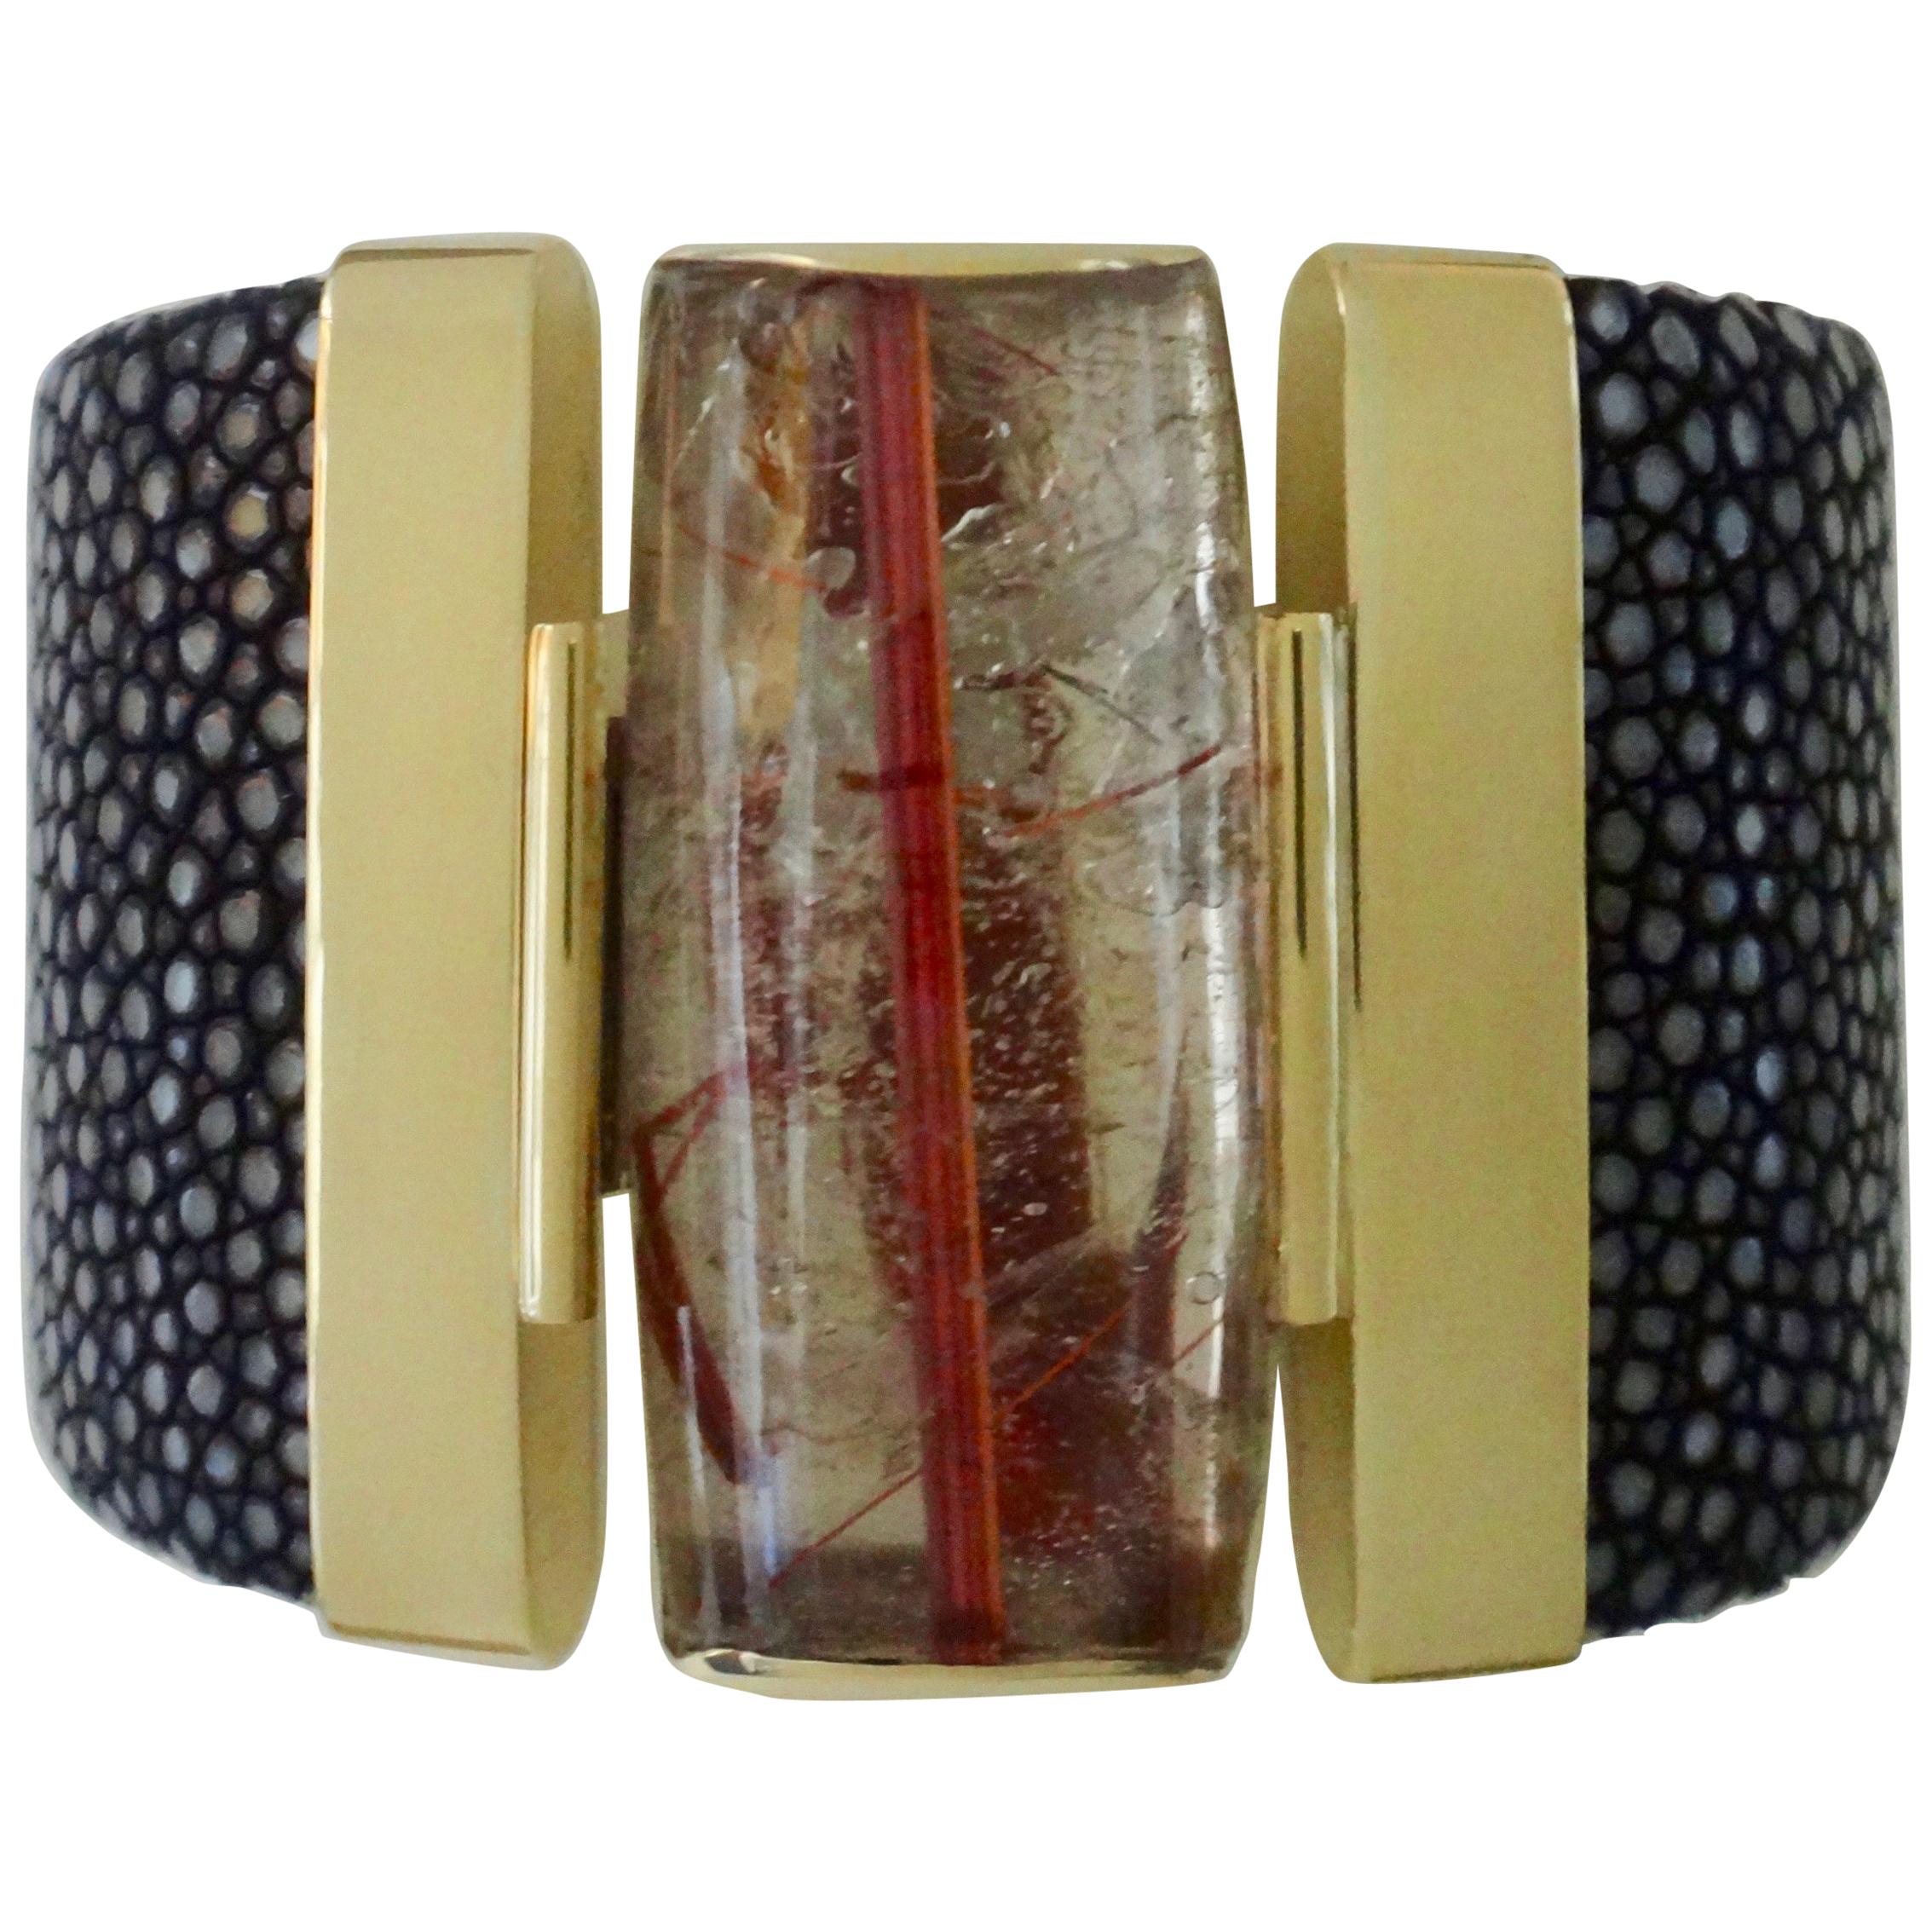 An extraordinary specimen of rutilated quartz (origin: Brazil) is featured in this bold cuff bracelet.  Rutilated quartz is a member of a vast family of gems including amethyst and citrine.   In this example, the quartz possesses inclusions of